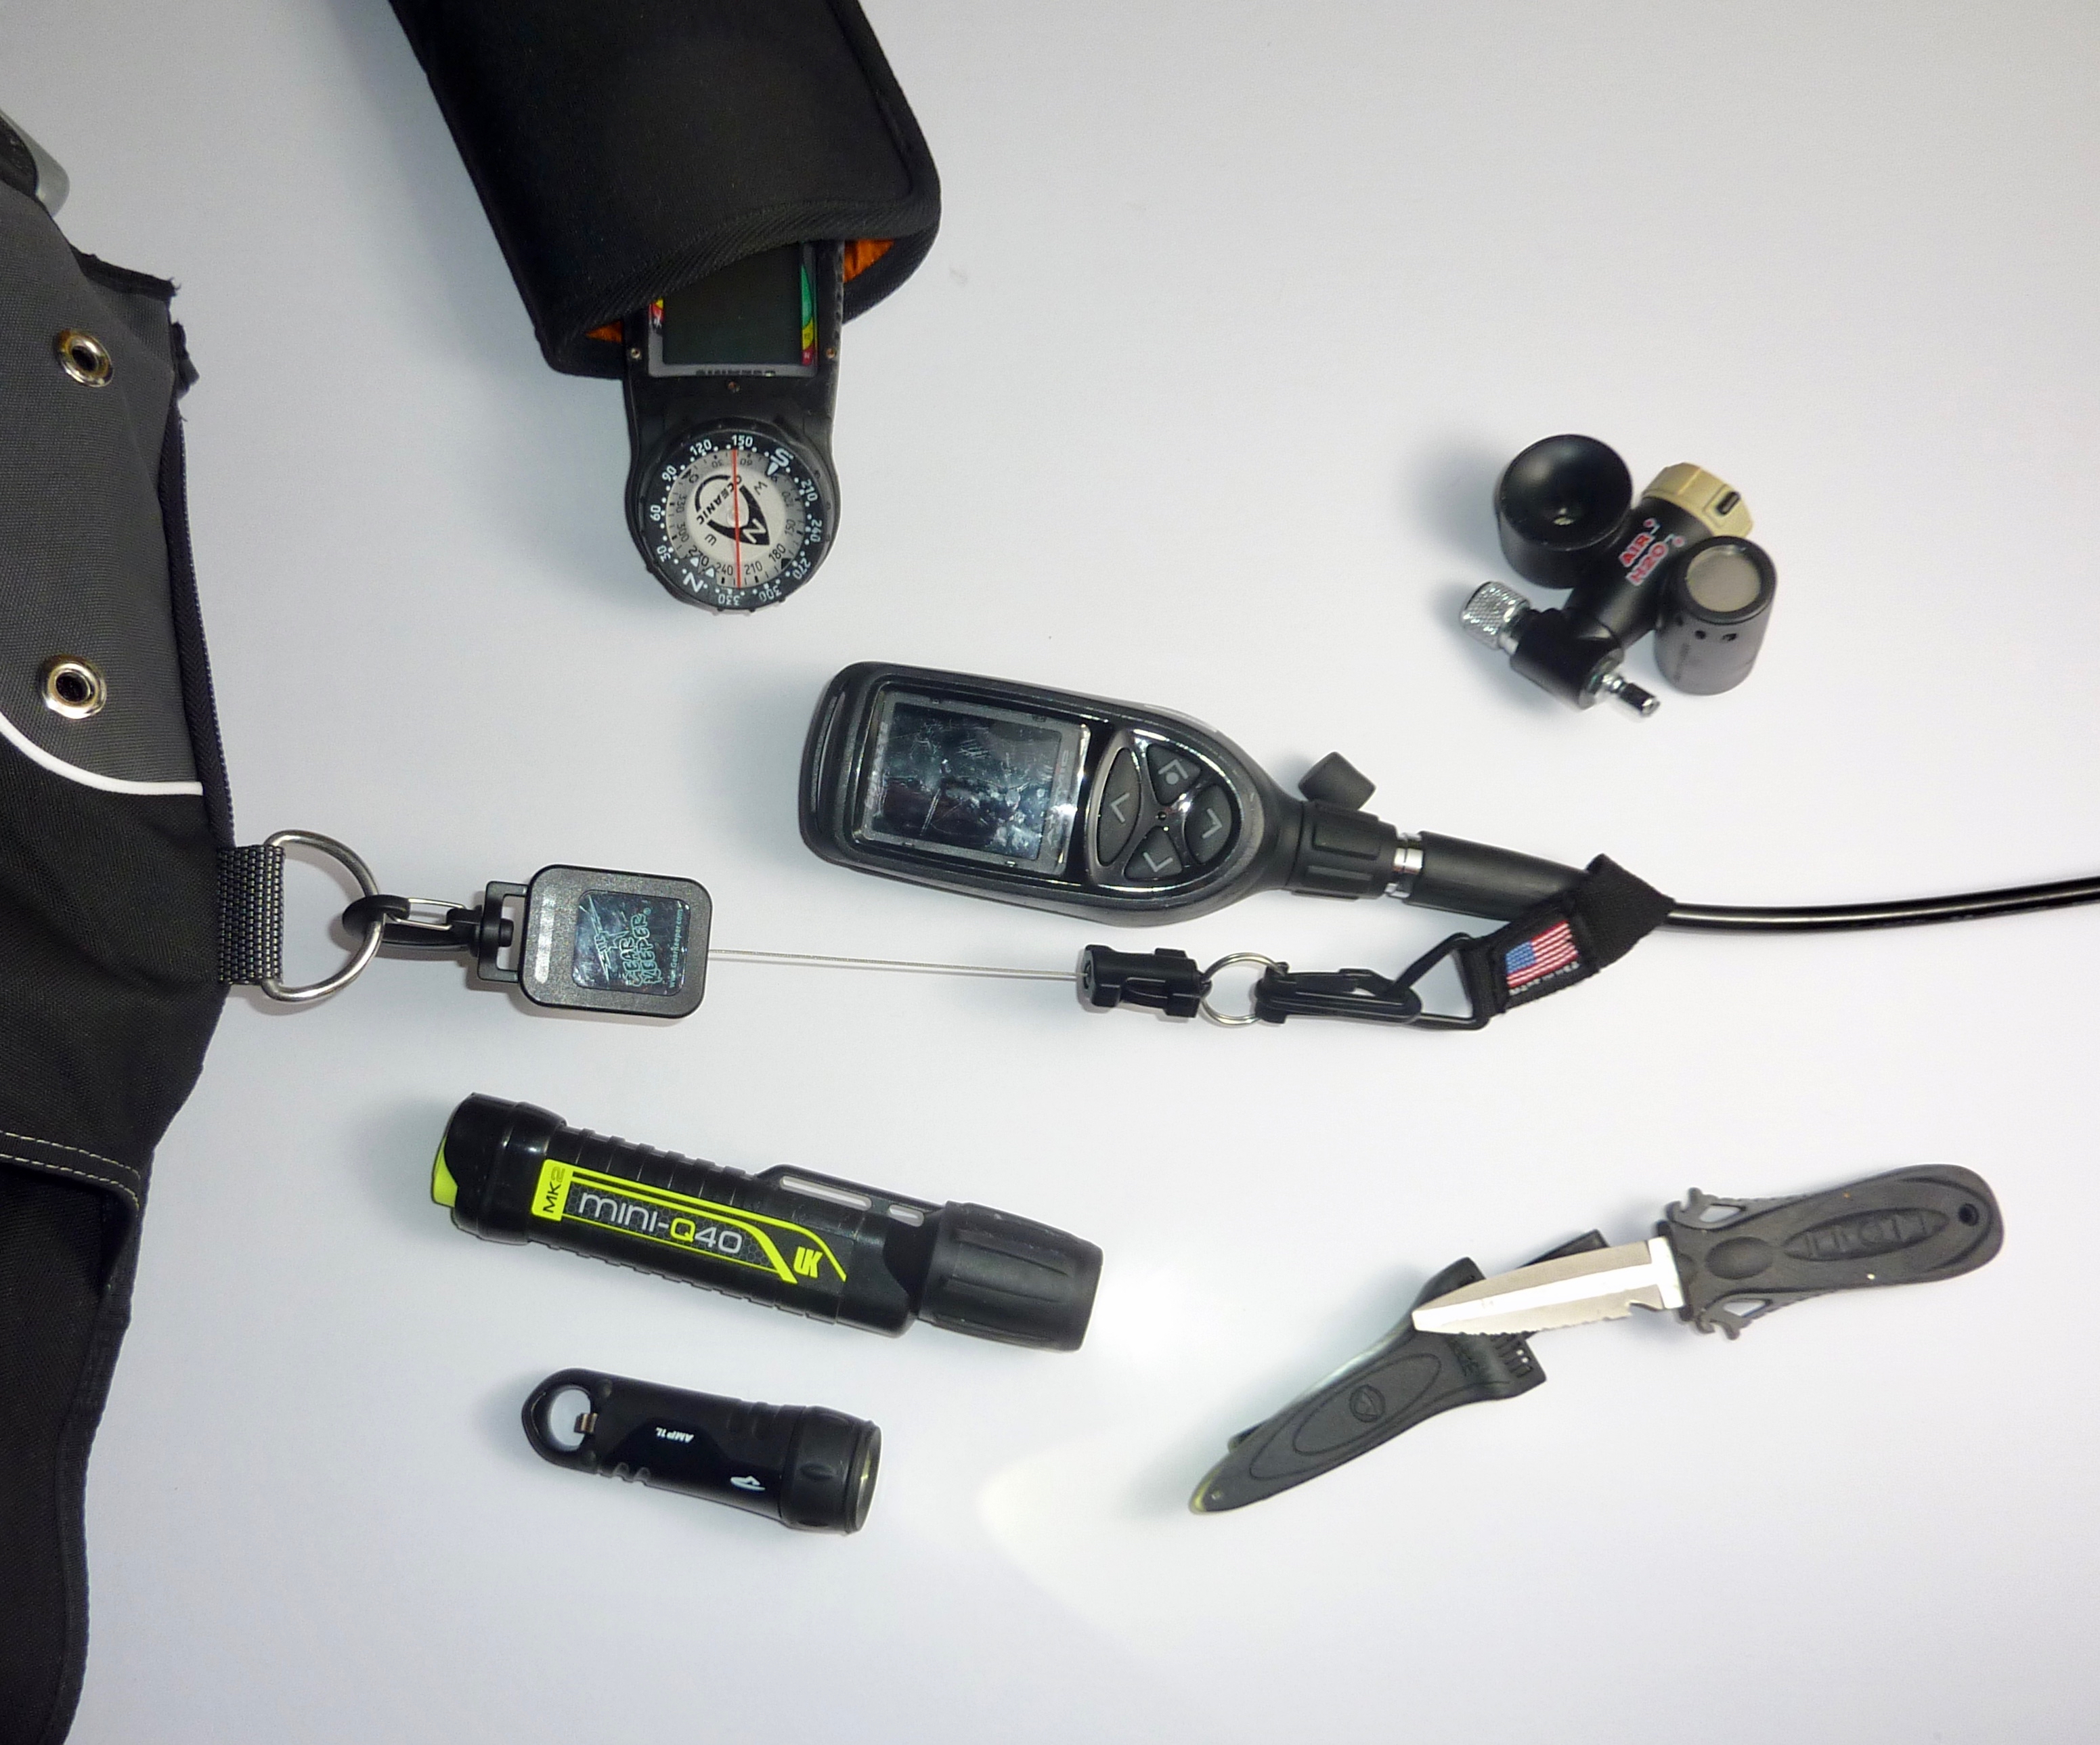 This image portrays Beyond Basic Dive Gear: Gadgets and Gizmos that Up Your Game  by California Diving News.